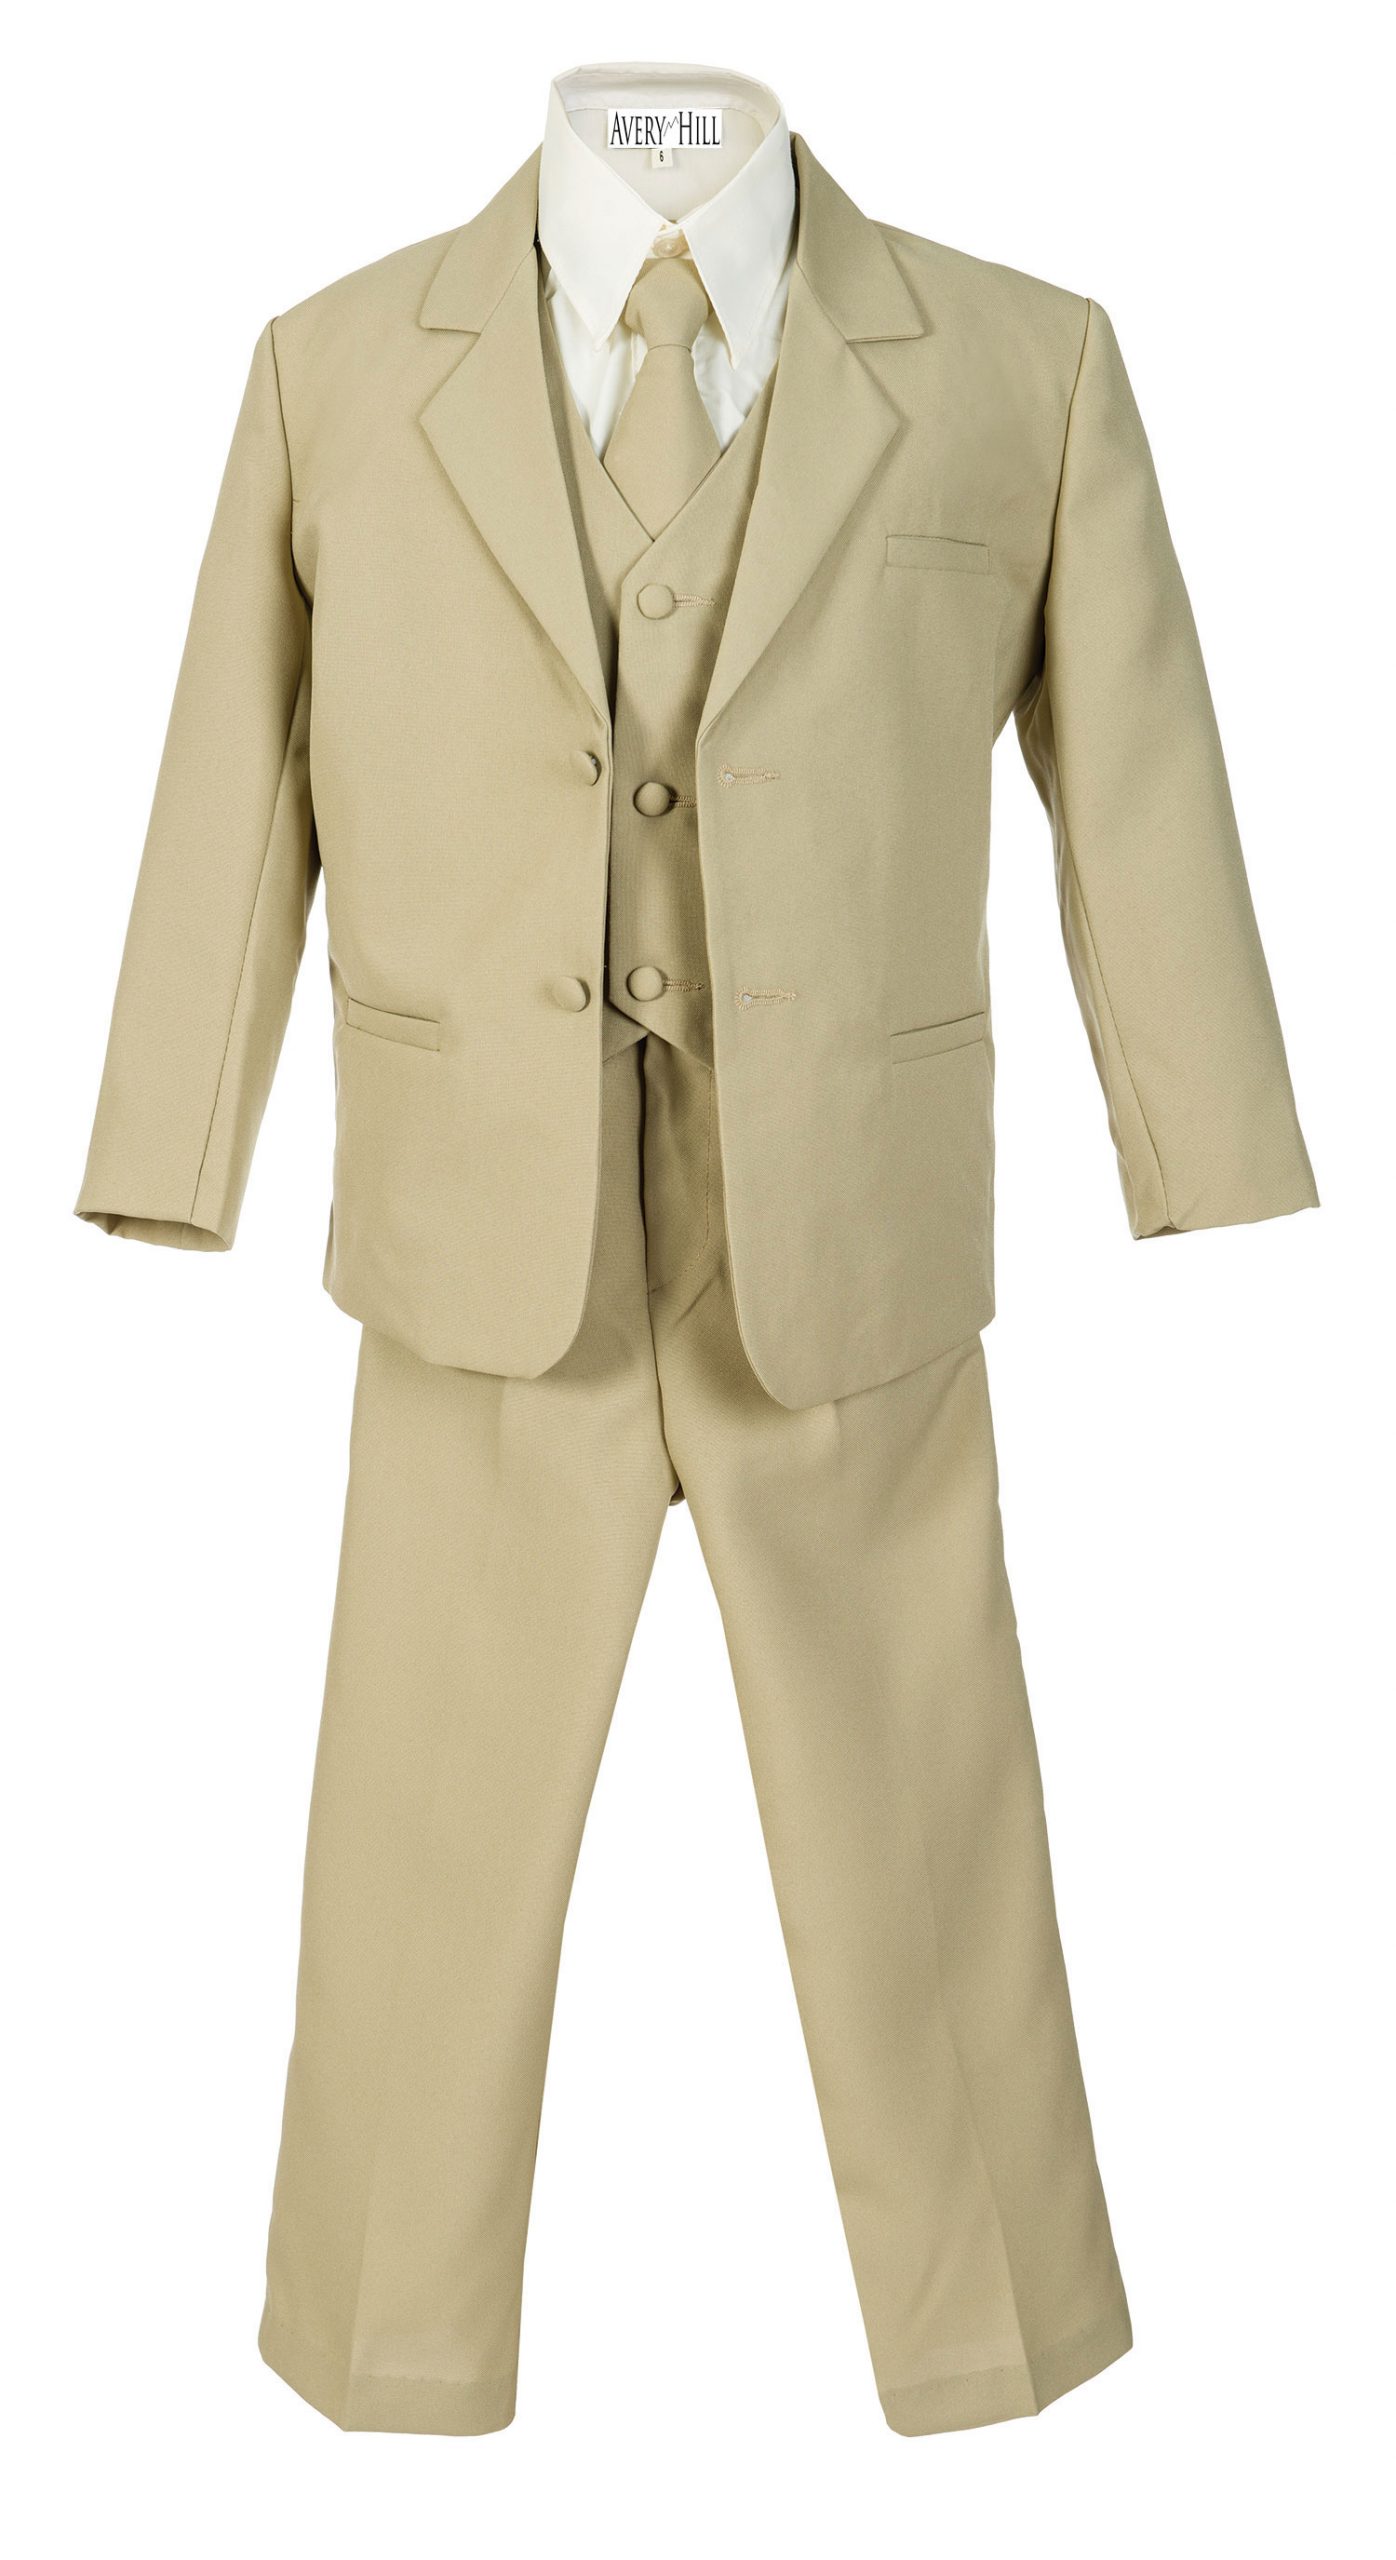 Avery Hill Boys Formal 5 Piece Suit with Shirt and Vest Khaki - L